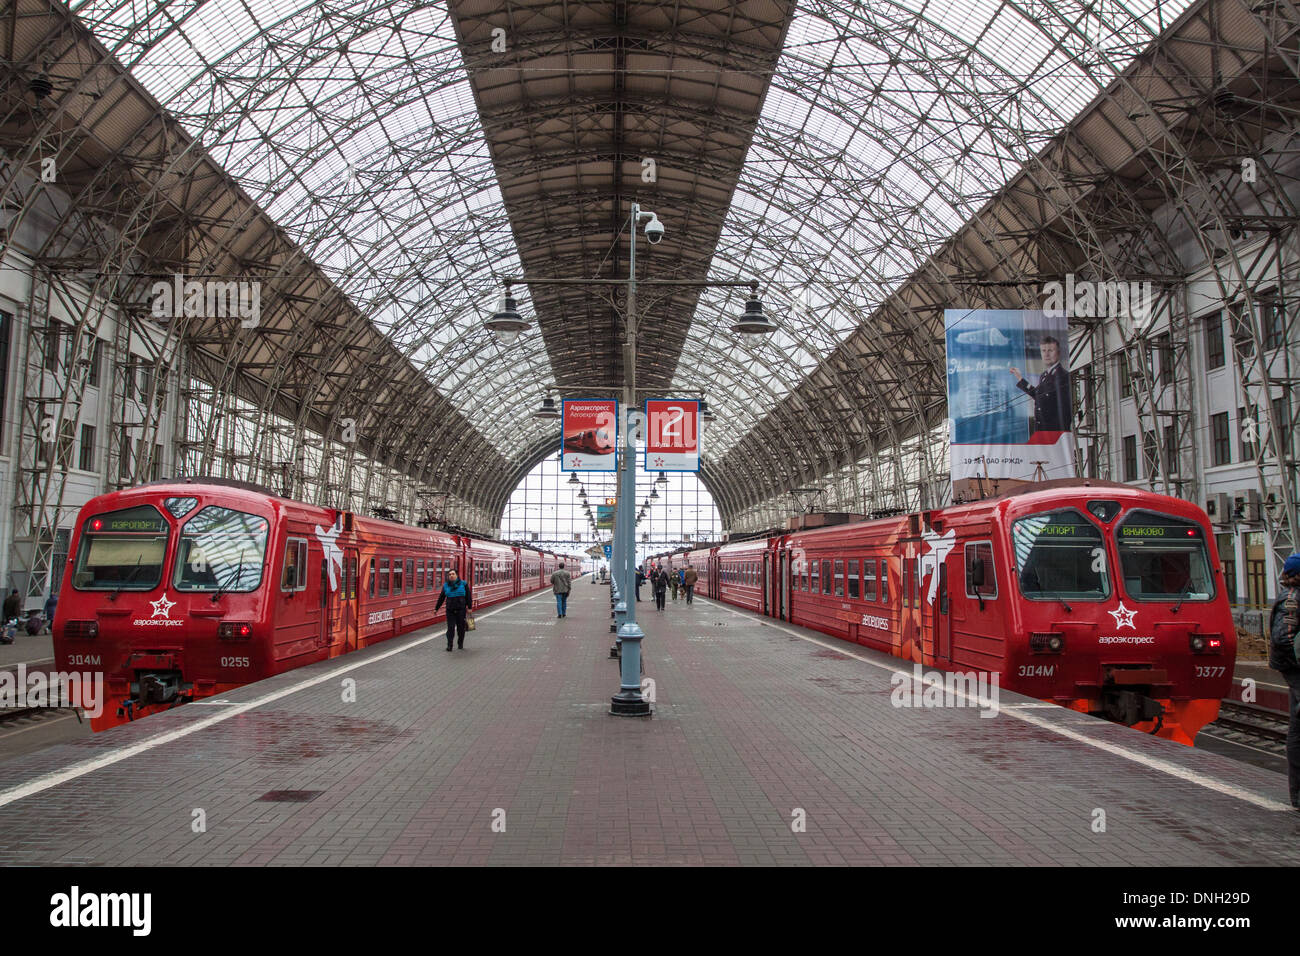 TRAINS AT THE PLATFORM BELOW THE GLASS ROOF OF THE KIEV STATION, MOSCOW, RUSSIA Stock Photo